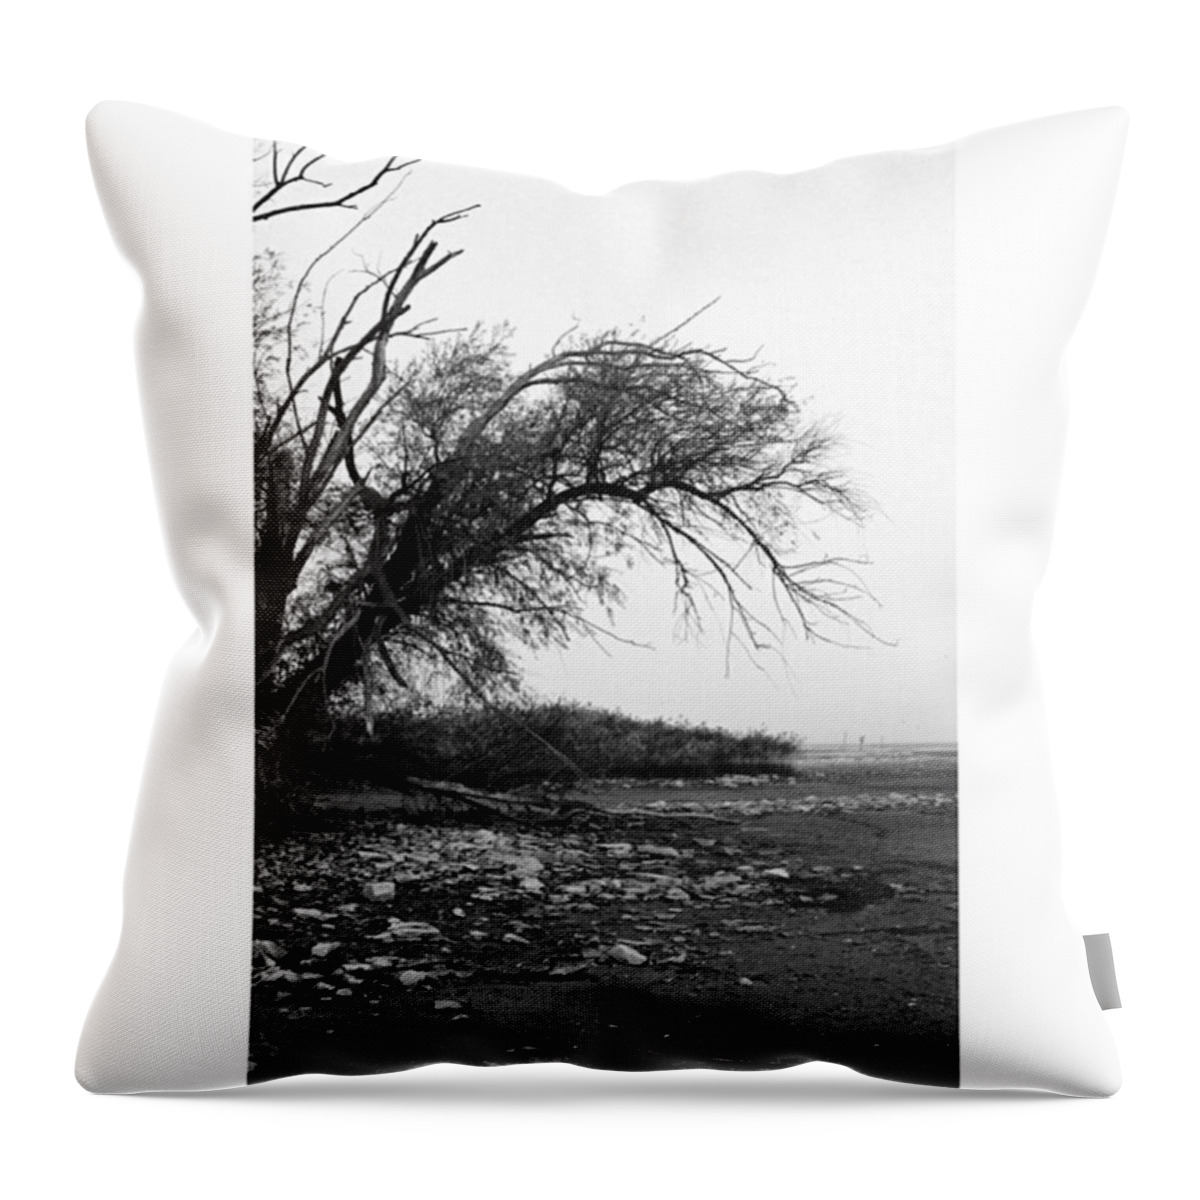 Monochrome Throw Pillow featuring the photograph #monochrome #lake #landscape #stausee by Mandy Tabatt